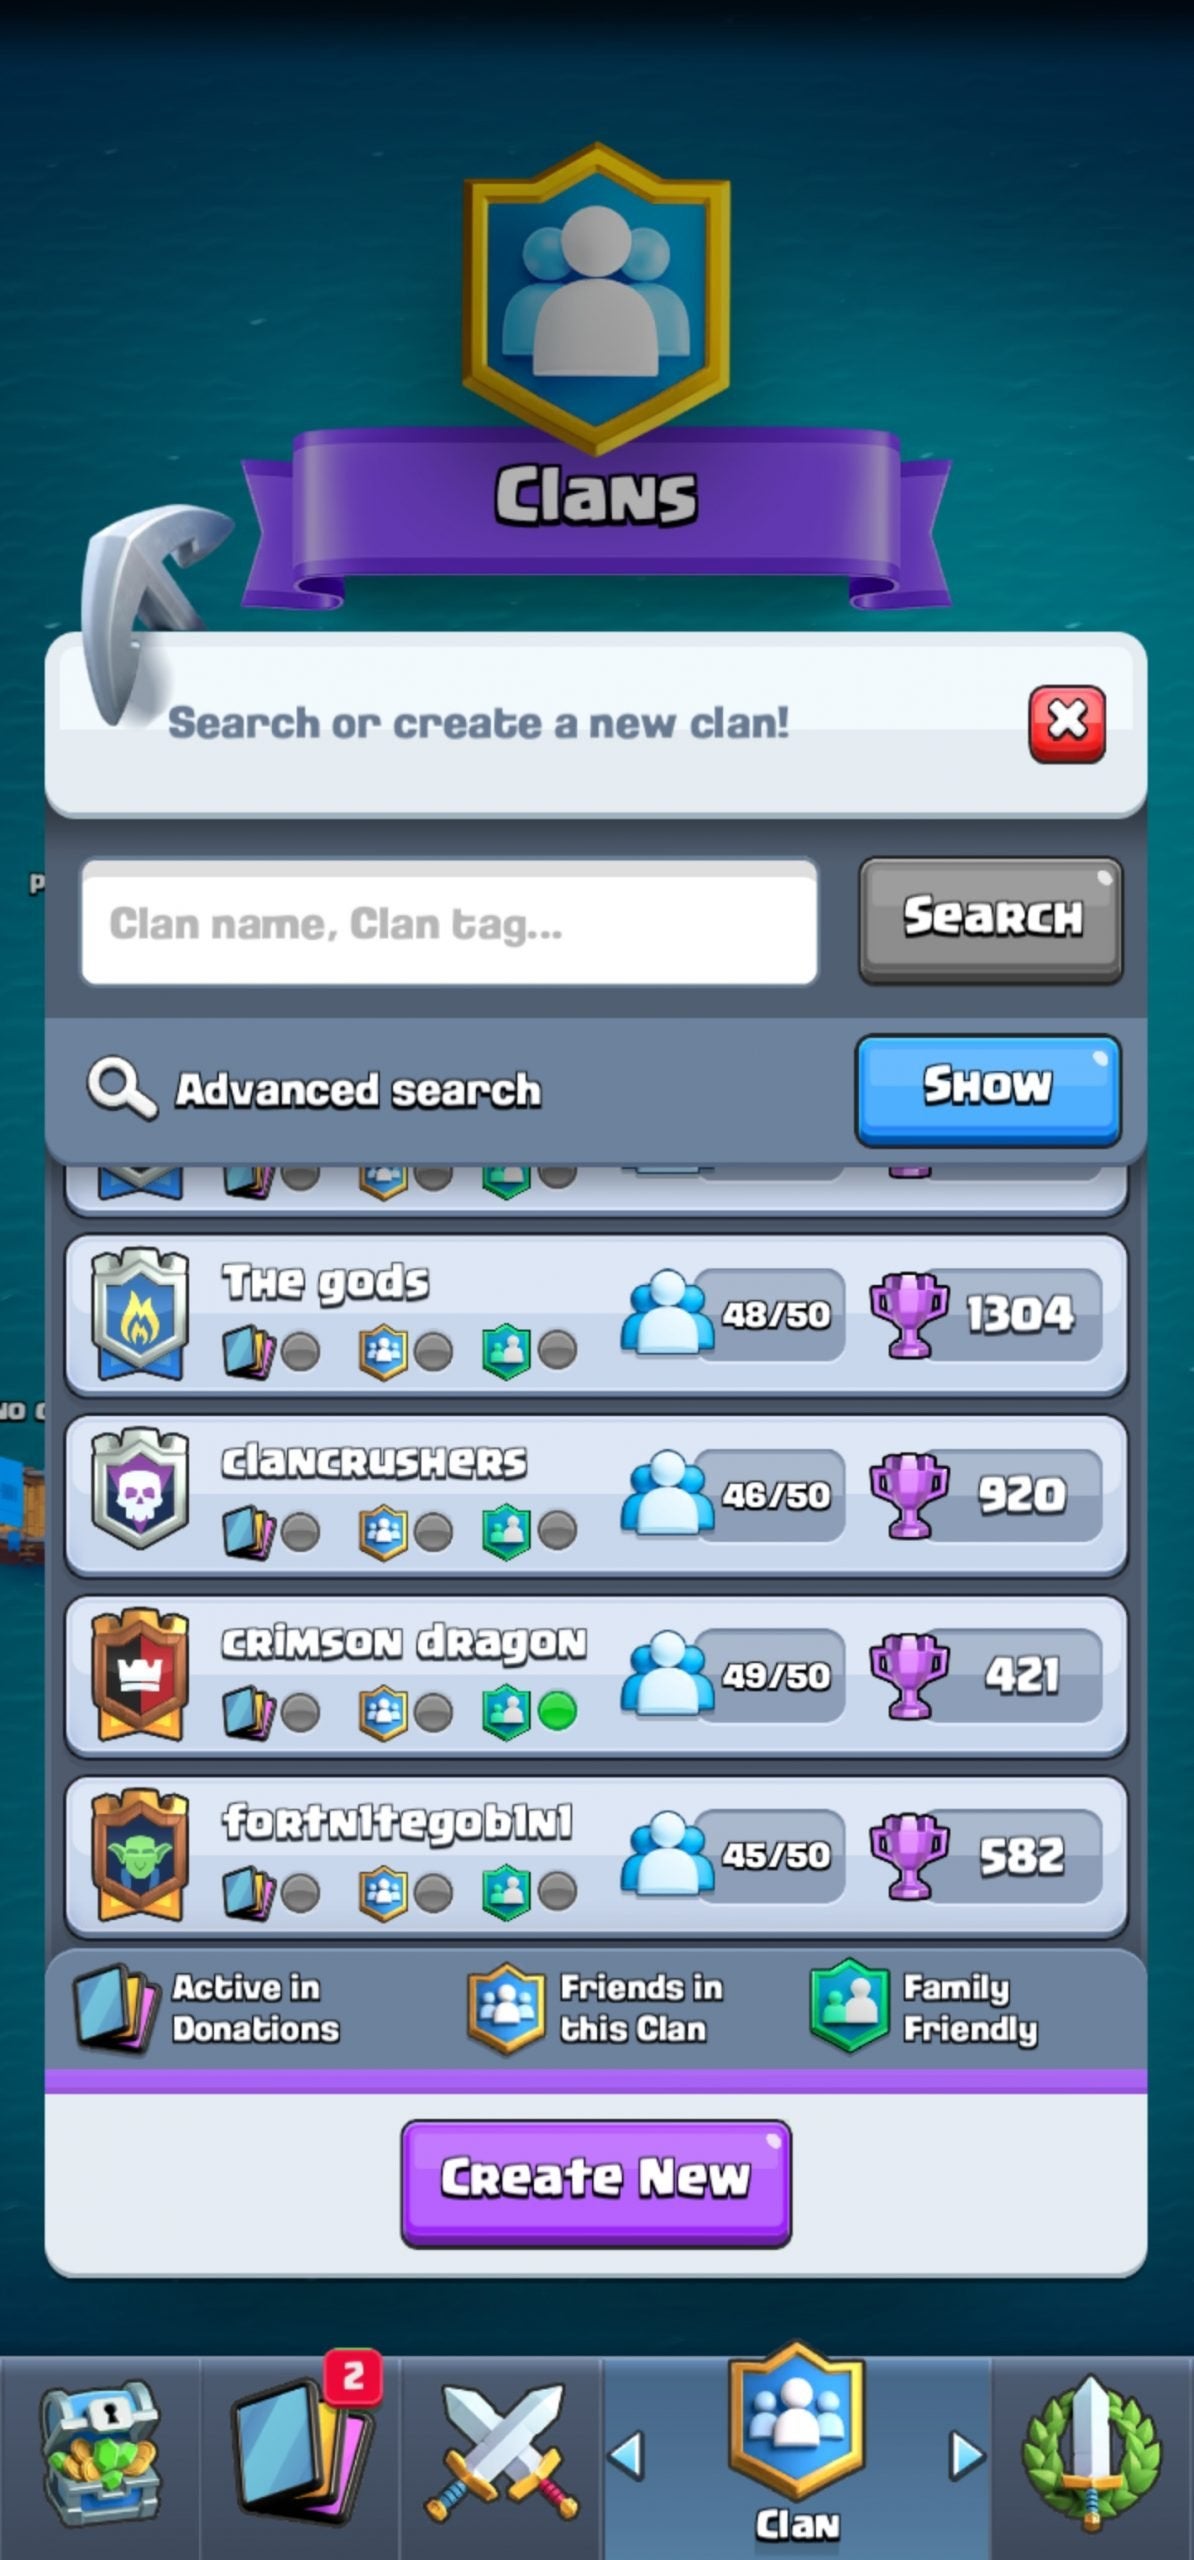 The Clans screen in Clash Royale listing possible clans to join and the option to create your own.